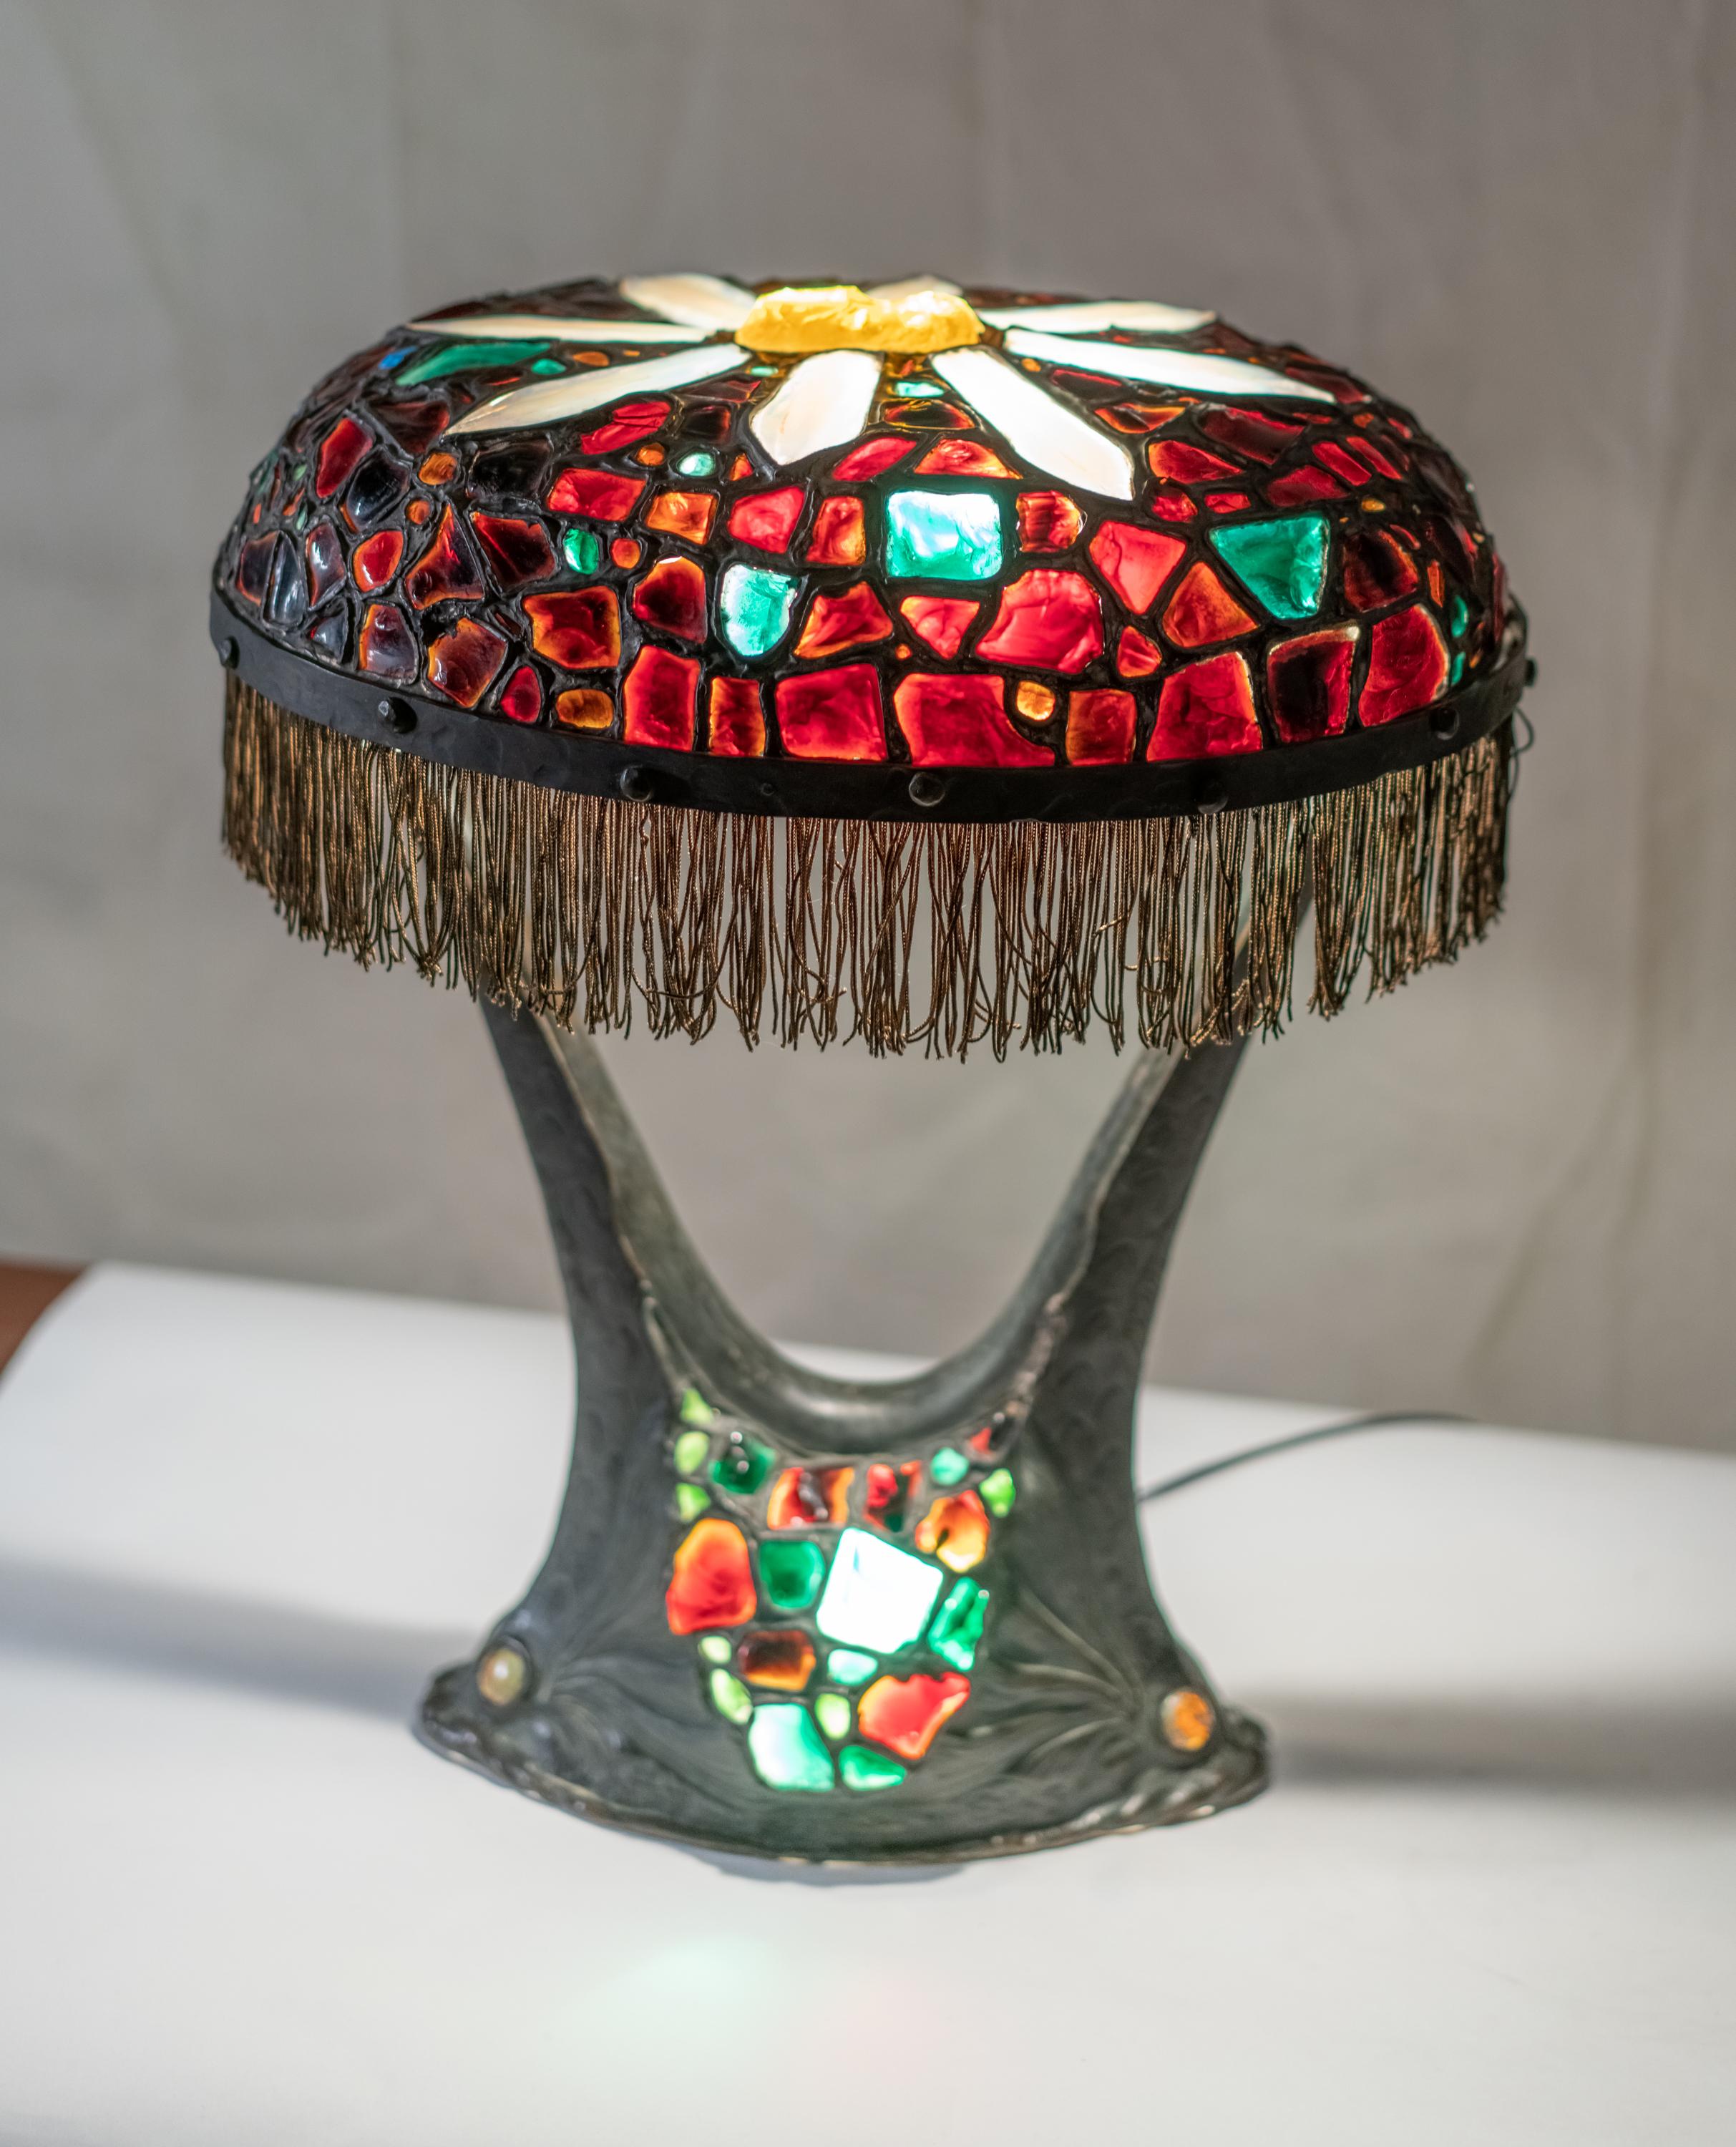 Rare Austrian colorful Art Nouveau bronze and glass chunk jewel table lamp. Attached on bronze sea monster base with eyes en cabochon. The jewels are all handcut and once light up with very vibrant colors.